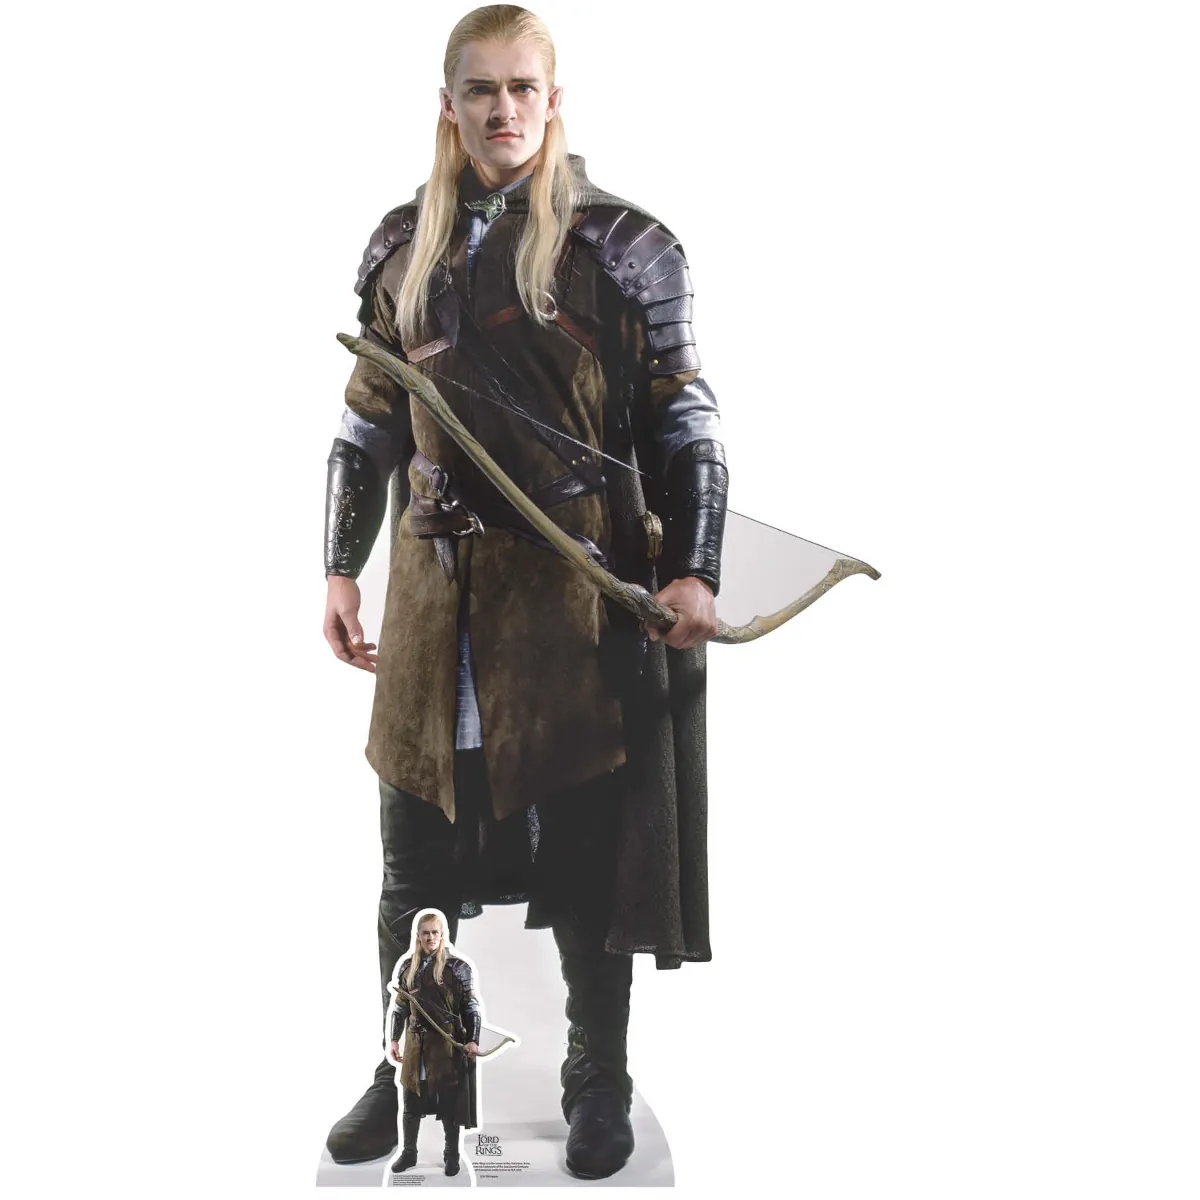 SC4129 Legolas (The Lord of the Rings) Official Lifesize + Mini Cardboard Cutout Standee Front